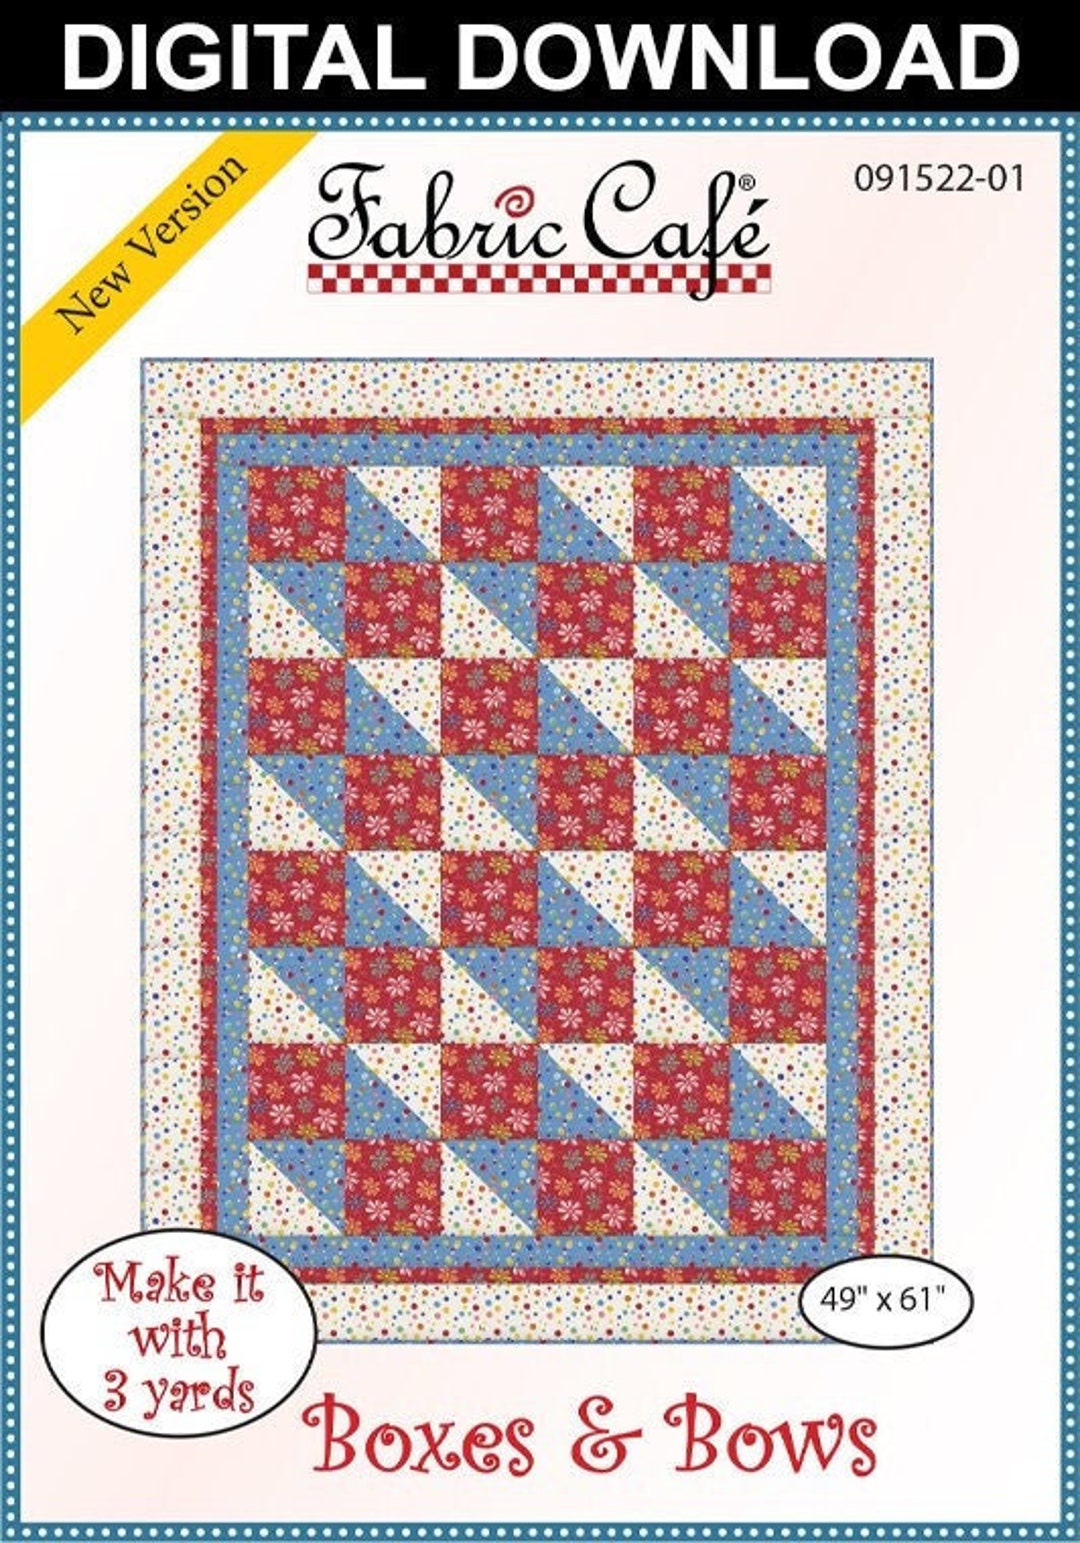 Porch Rails Pattern - 3-yard Quilt - Fabric Cafe